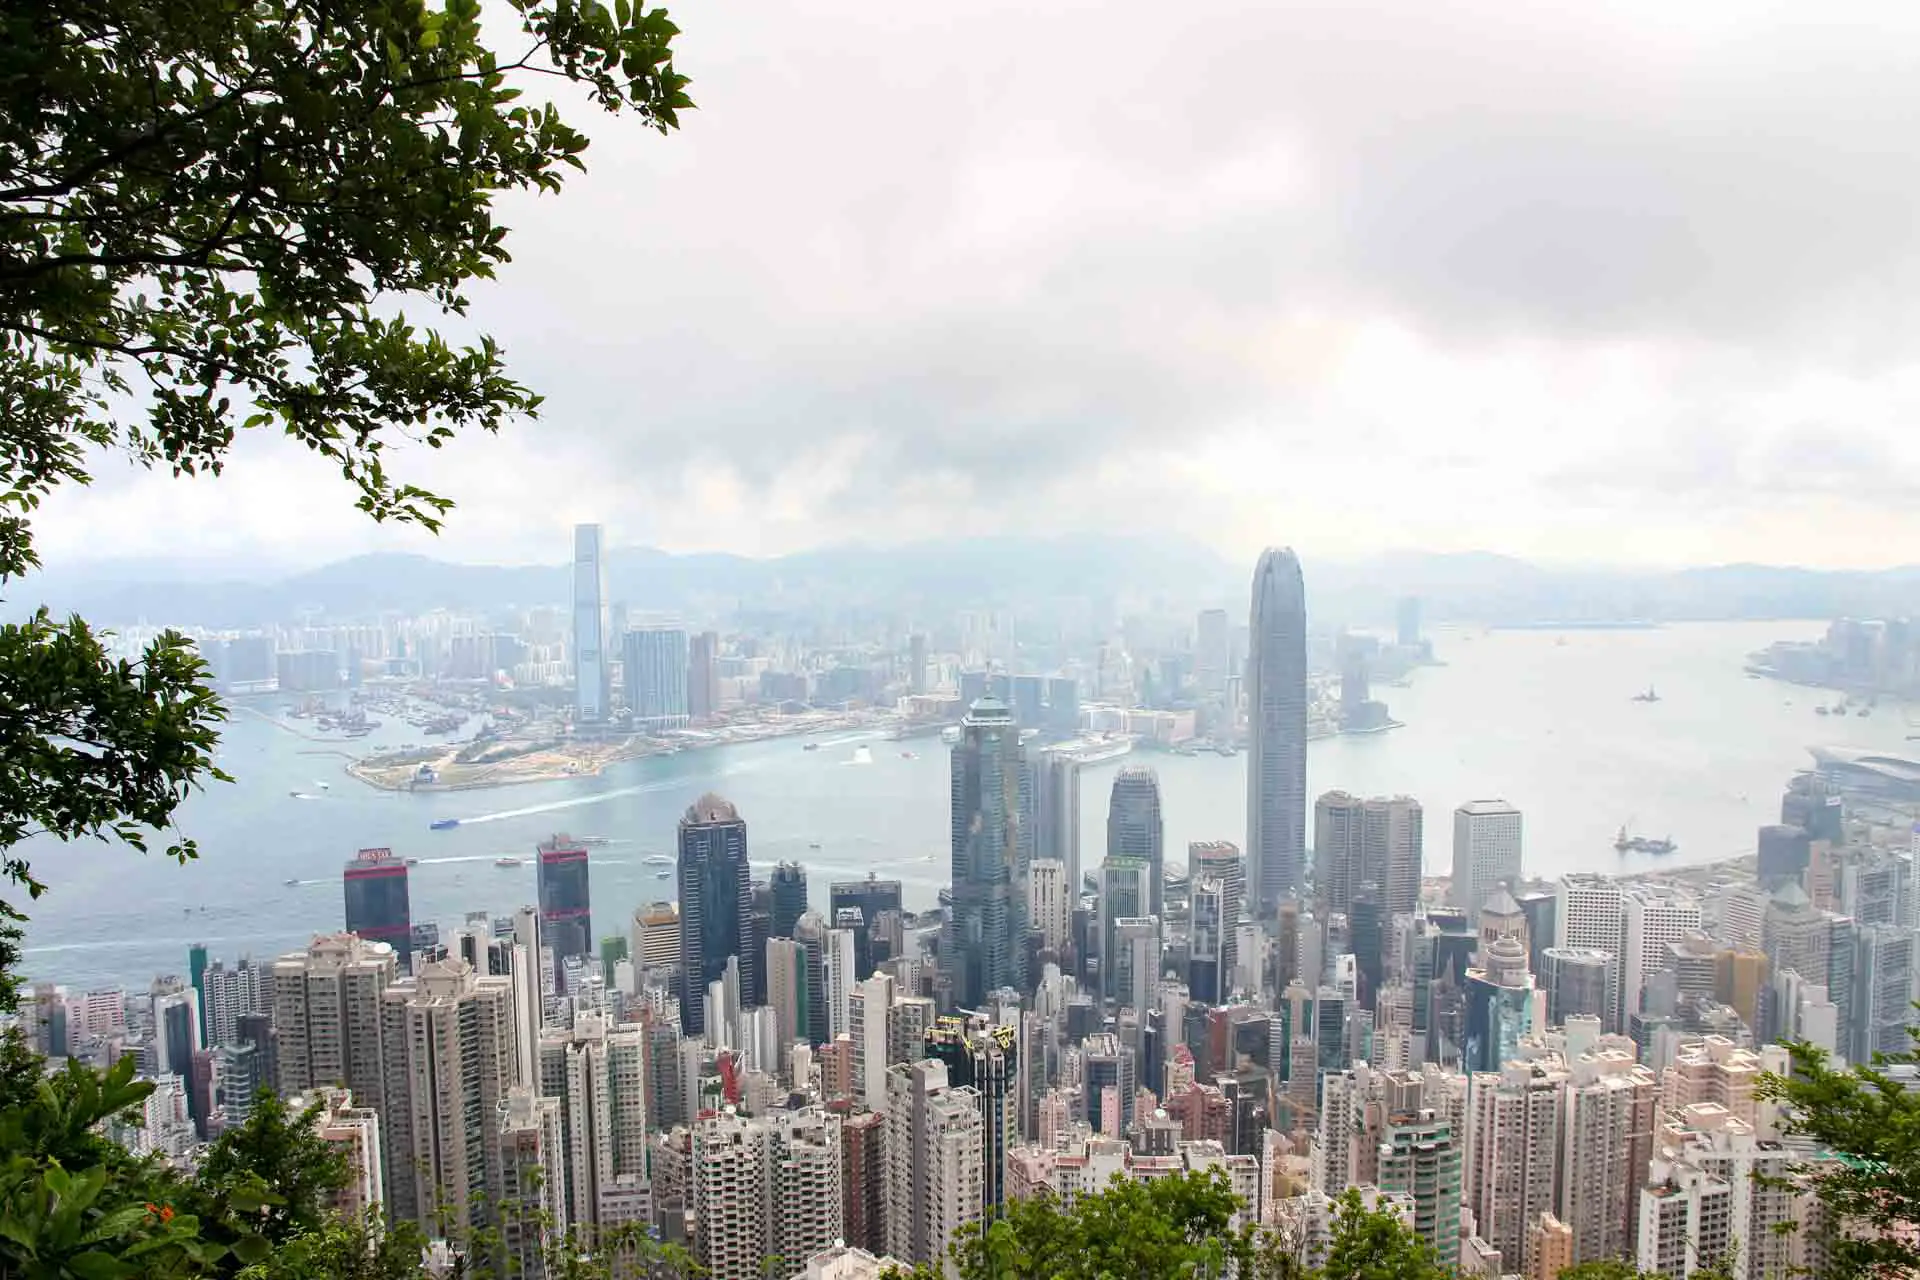 View from Victoria Peak looking down on skyscrapers of Hong Kong Island, with Kowloon in background